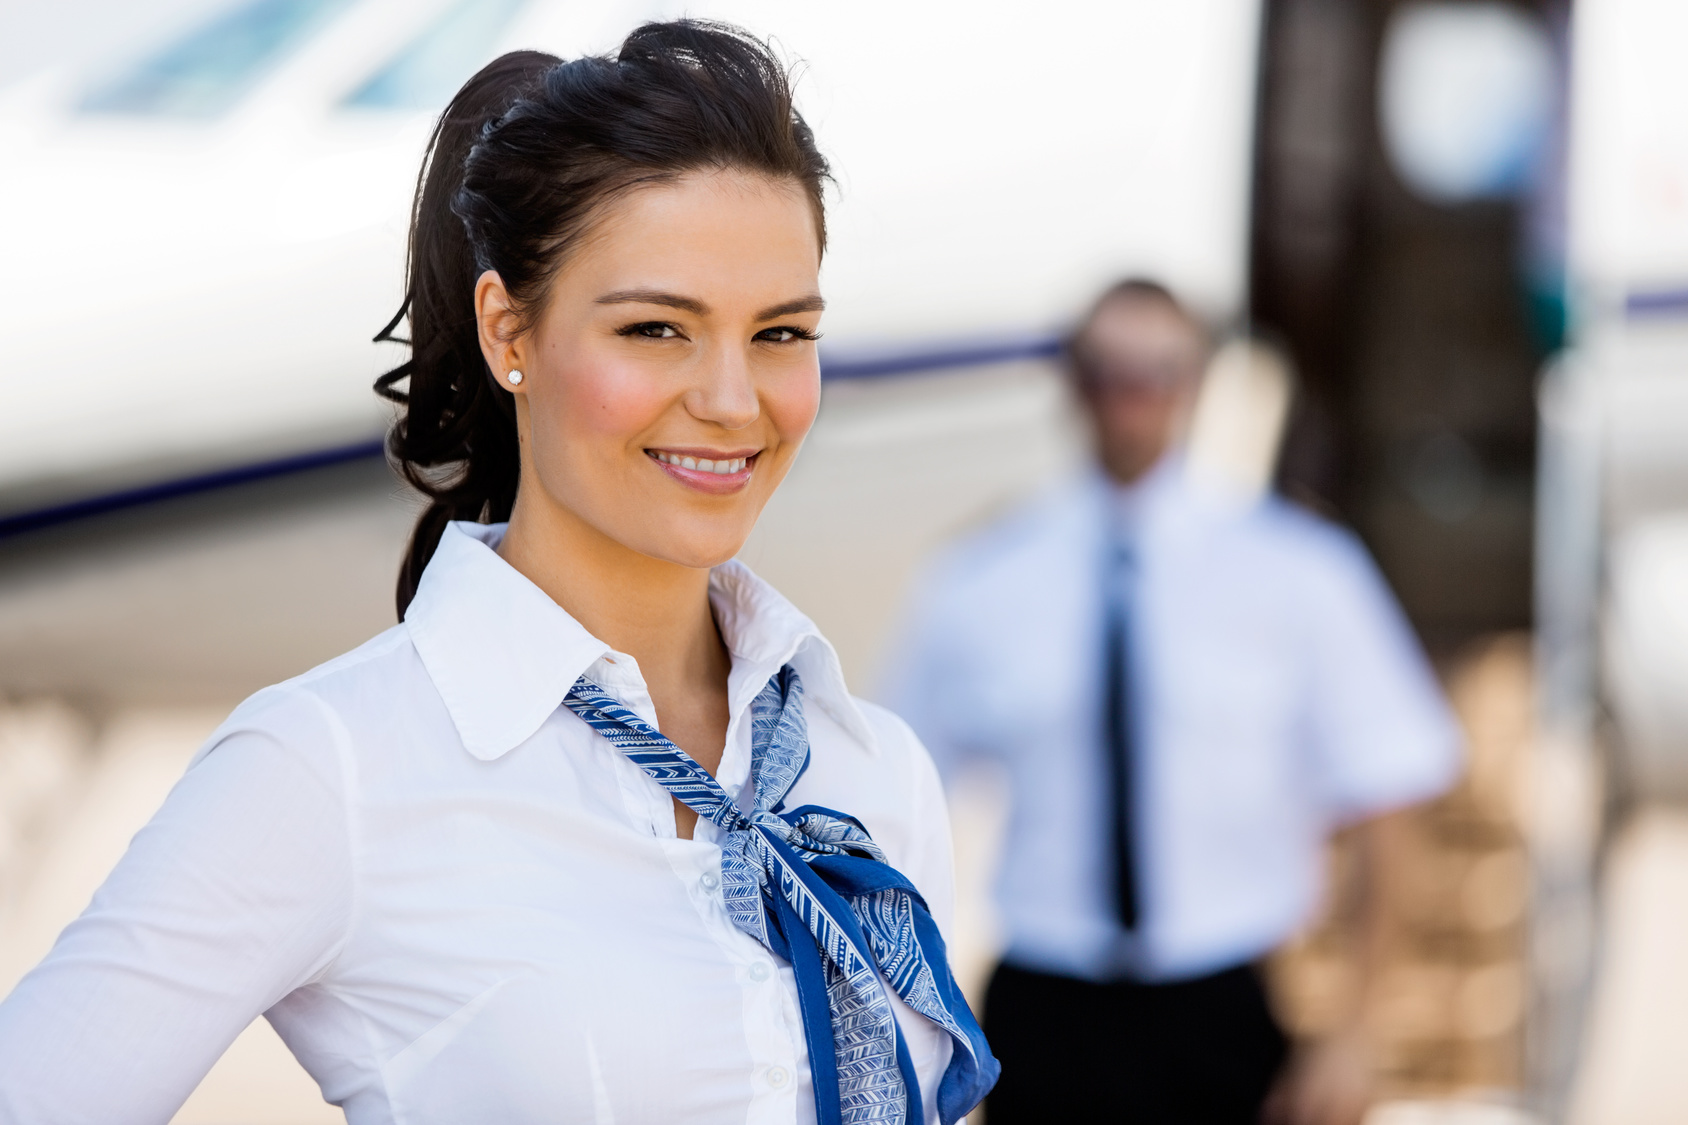 How to Prepare for Your New Flight Attendant Job